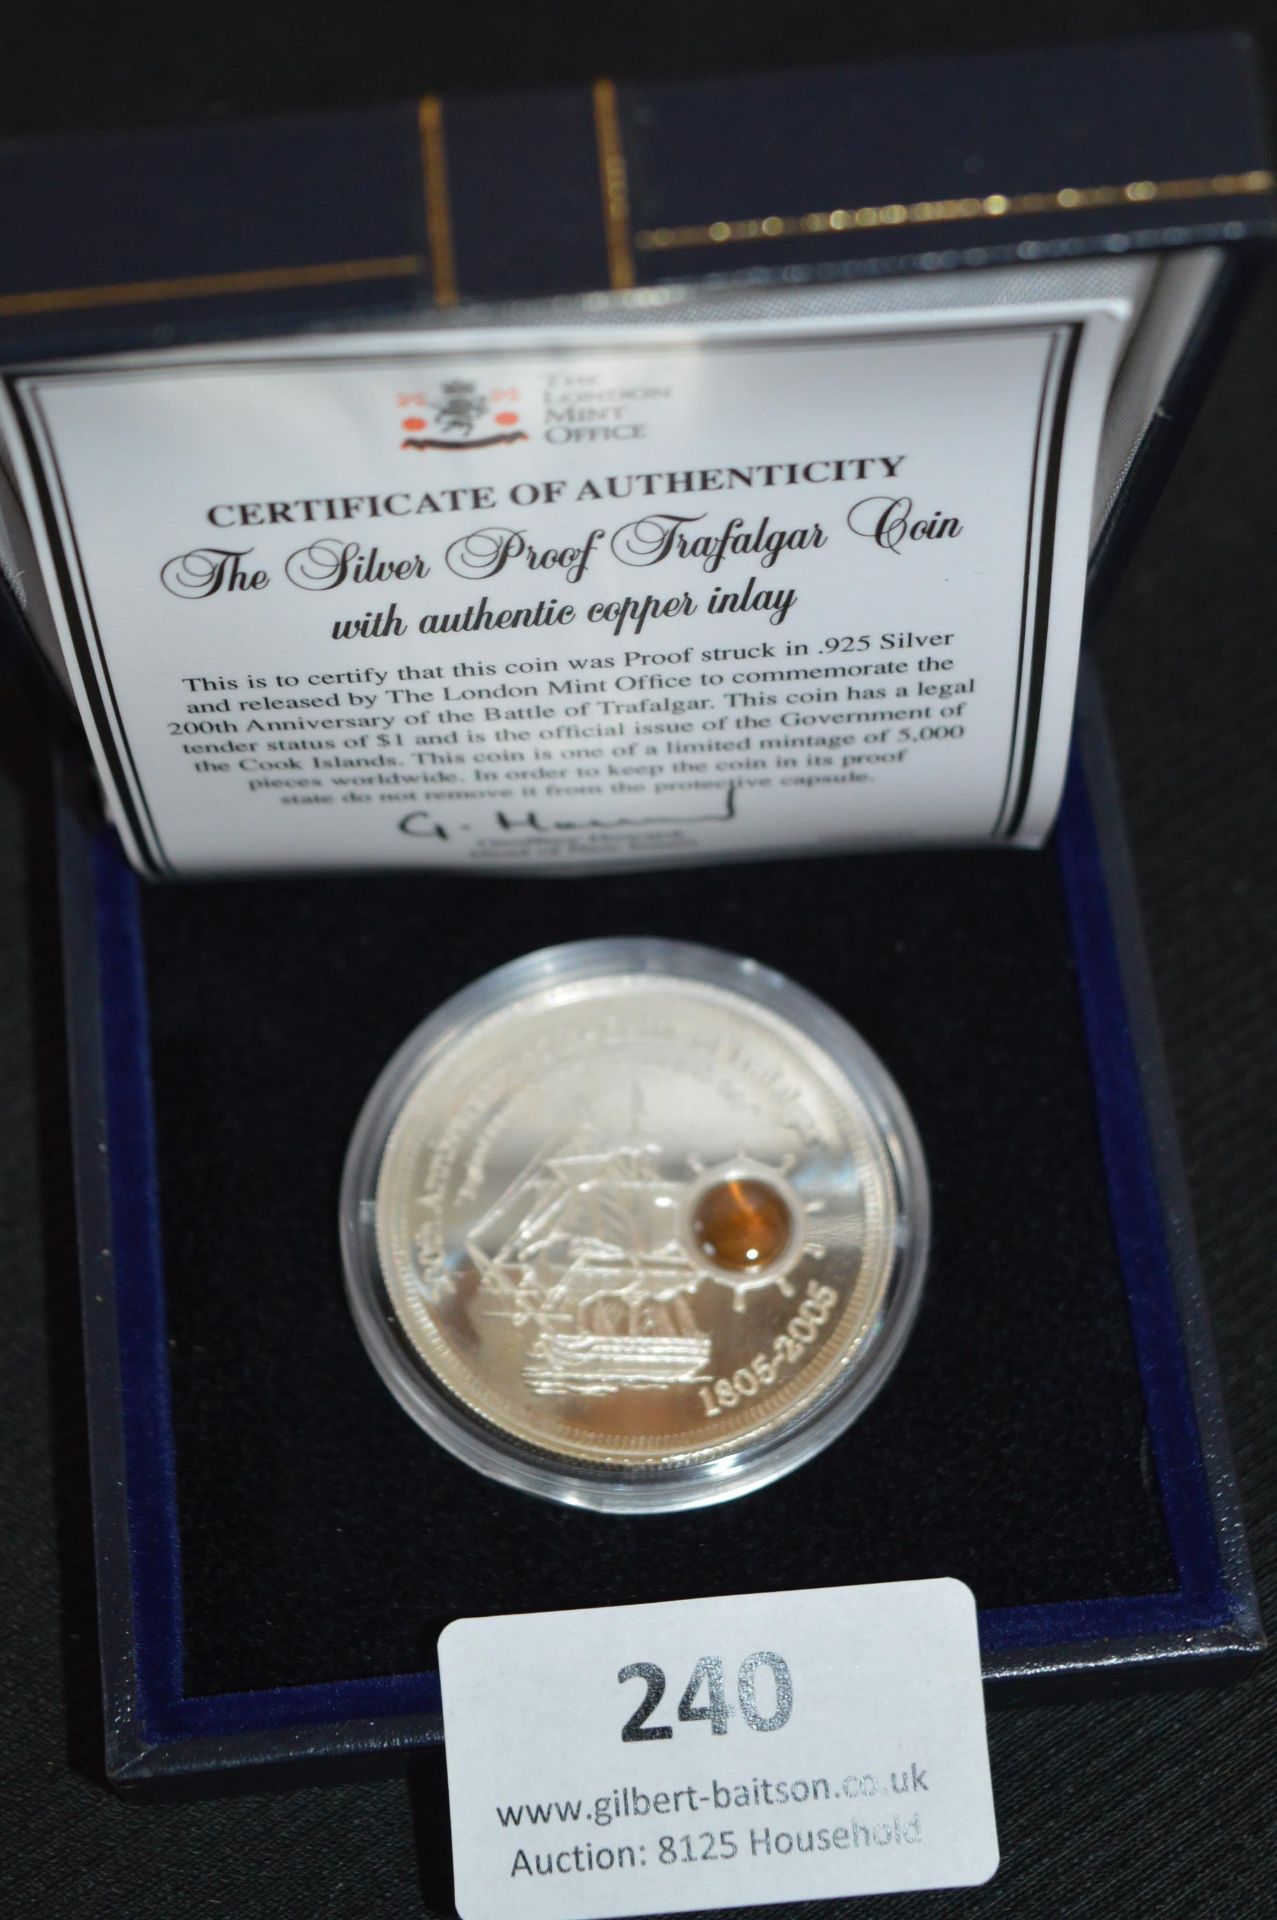 Silver Proof Trafalgar Coin with Copper Inlay